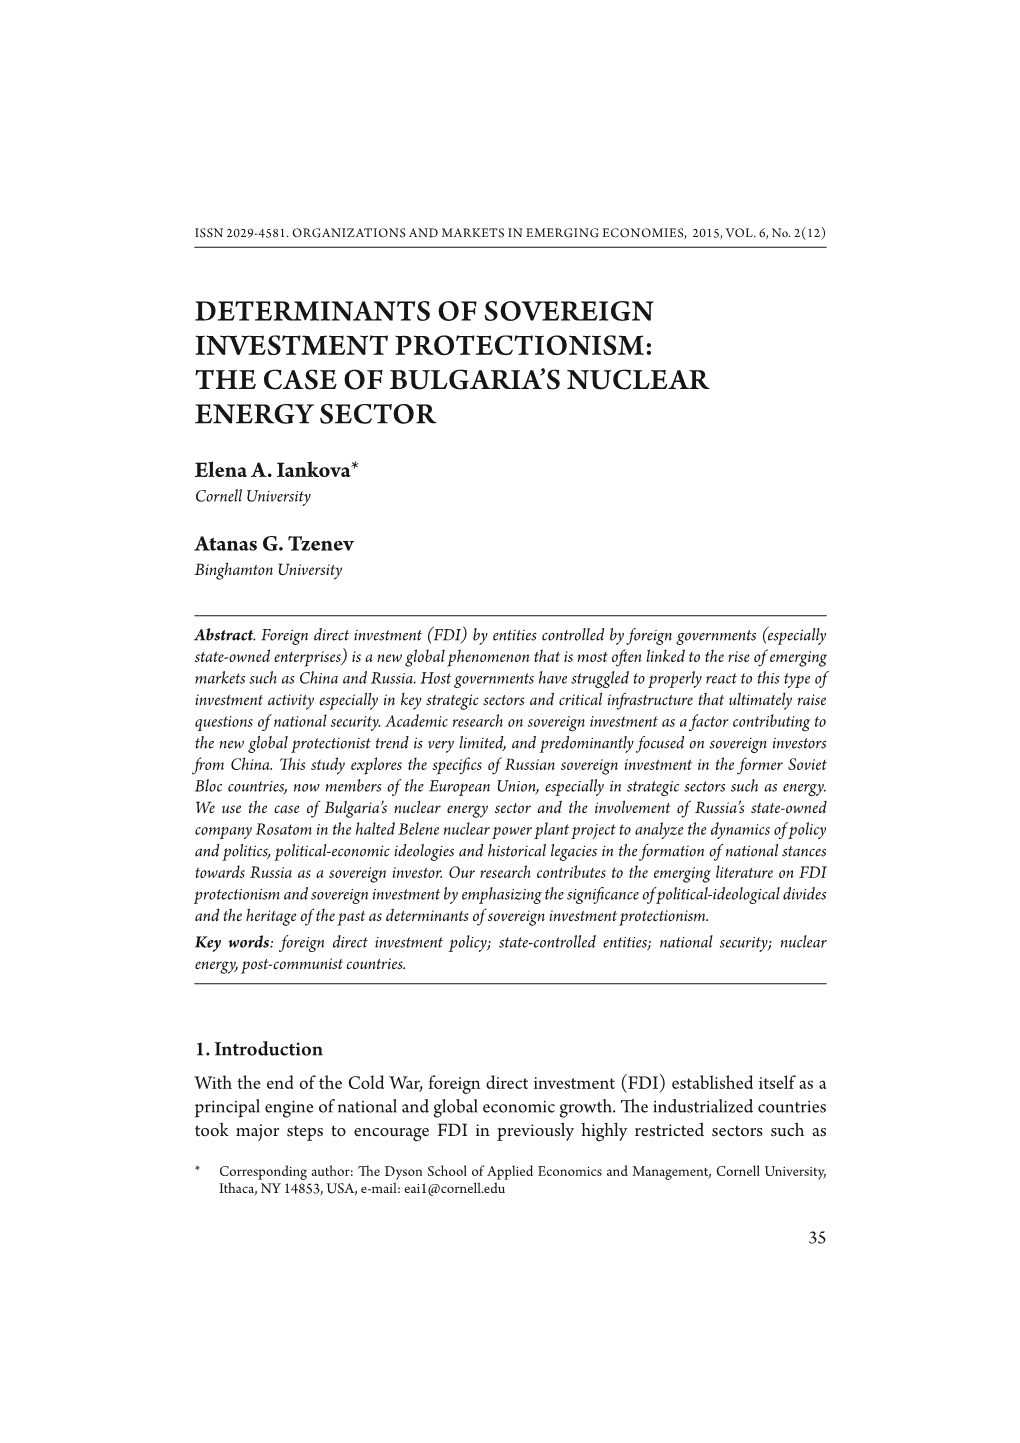 The Case of Bulgaria's Nuclear Energy Sector